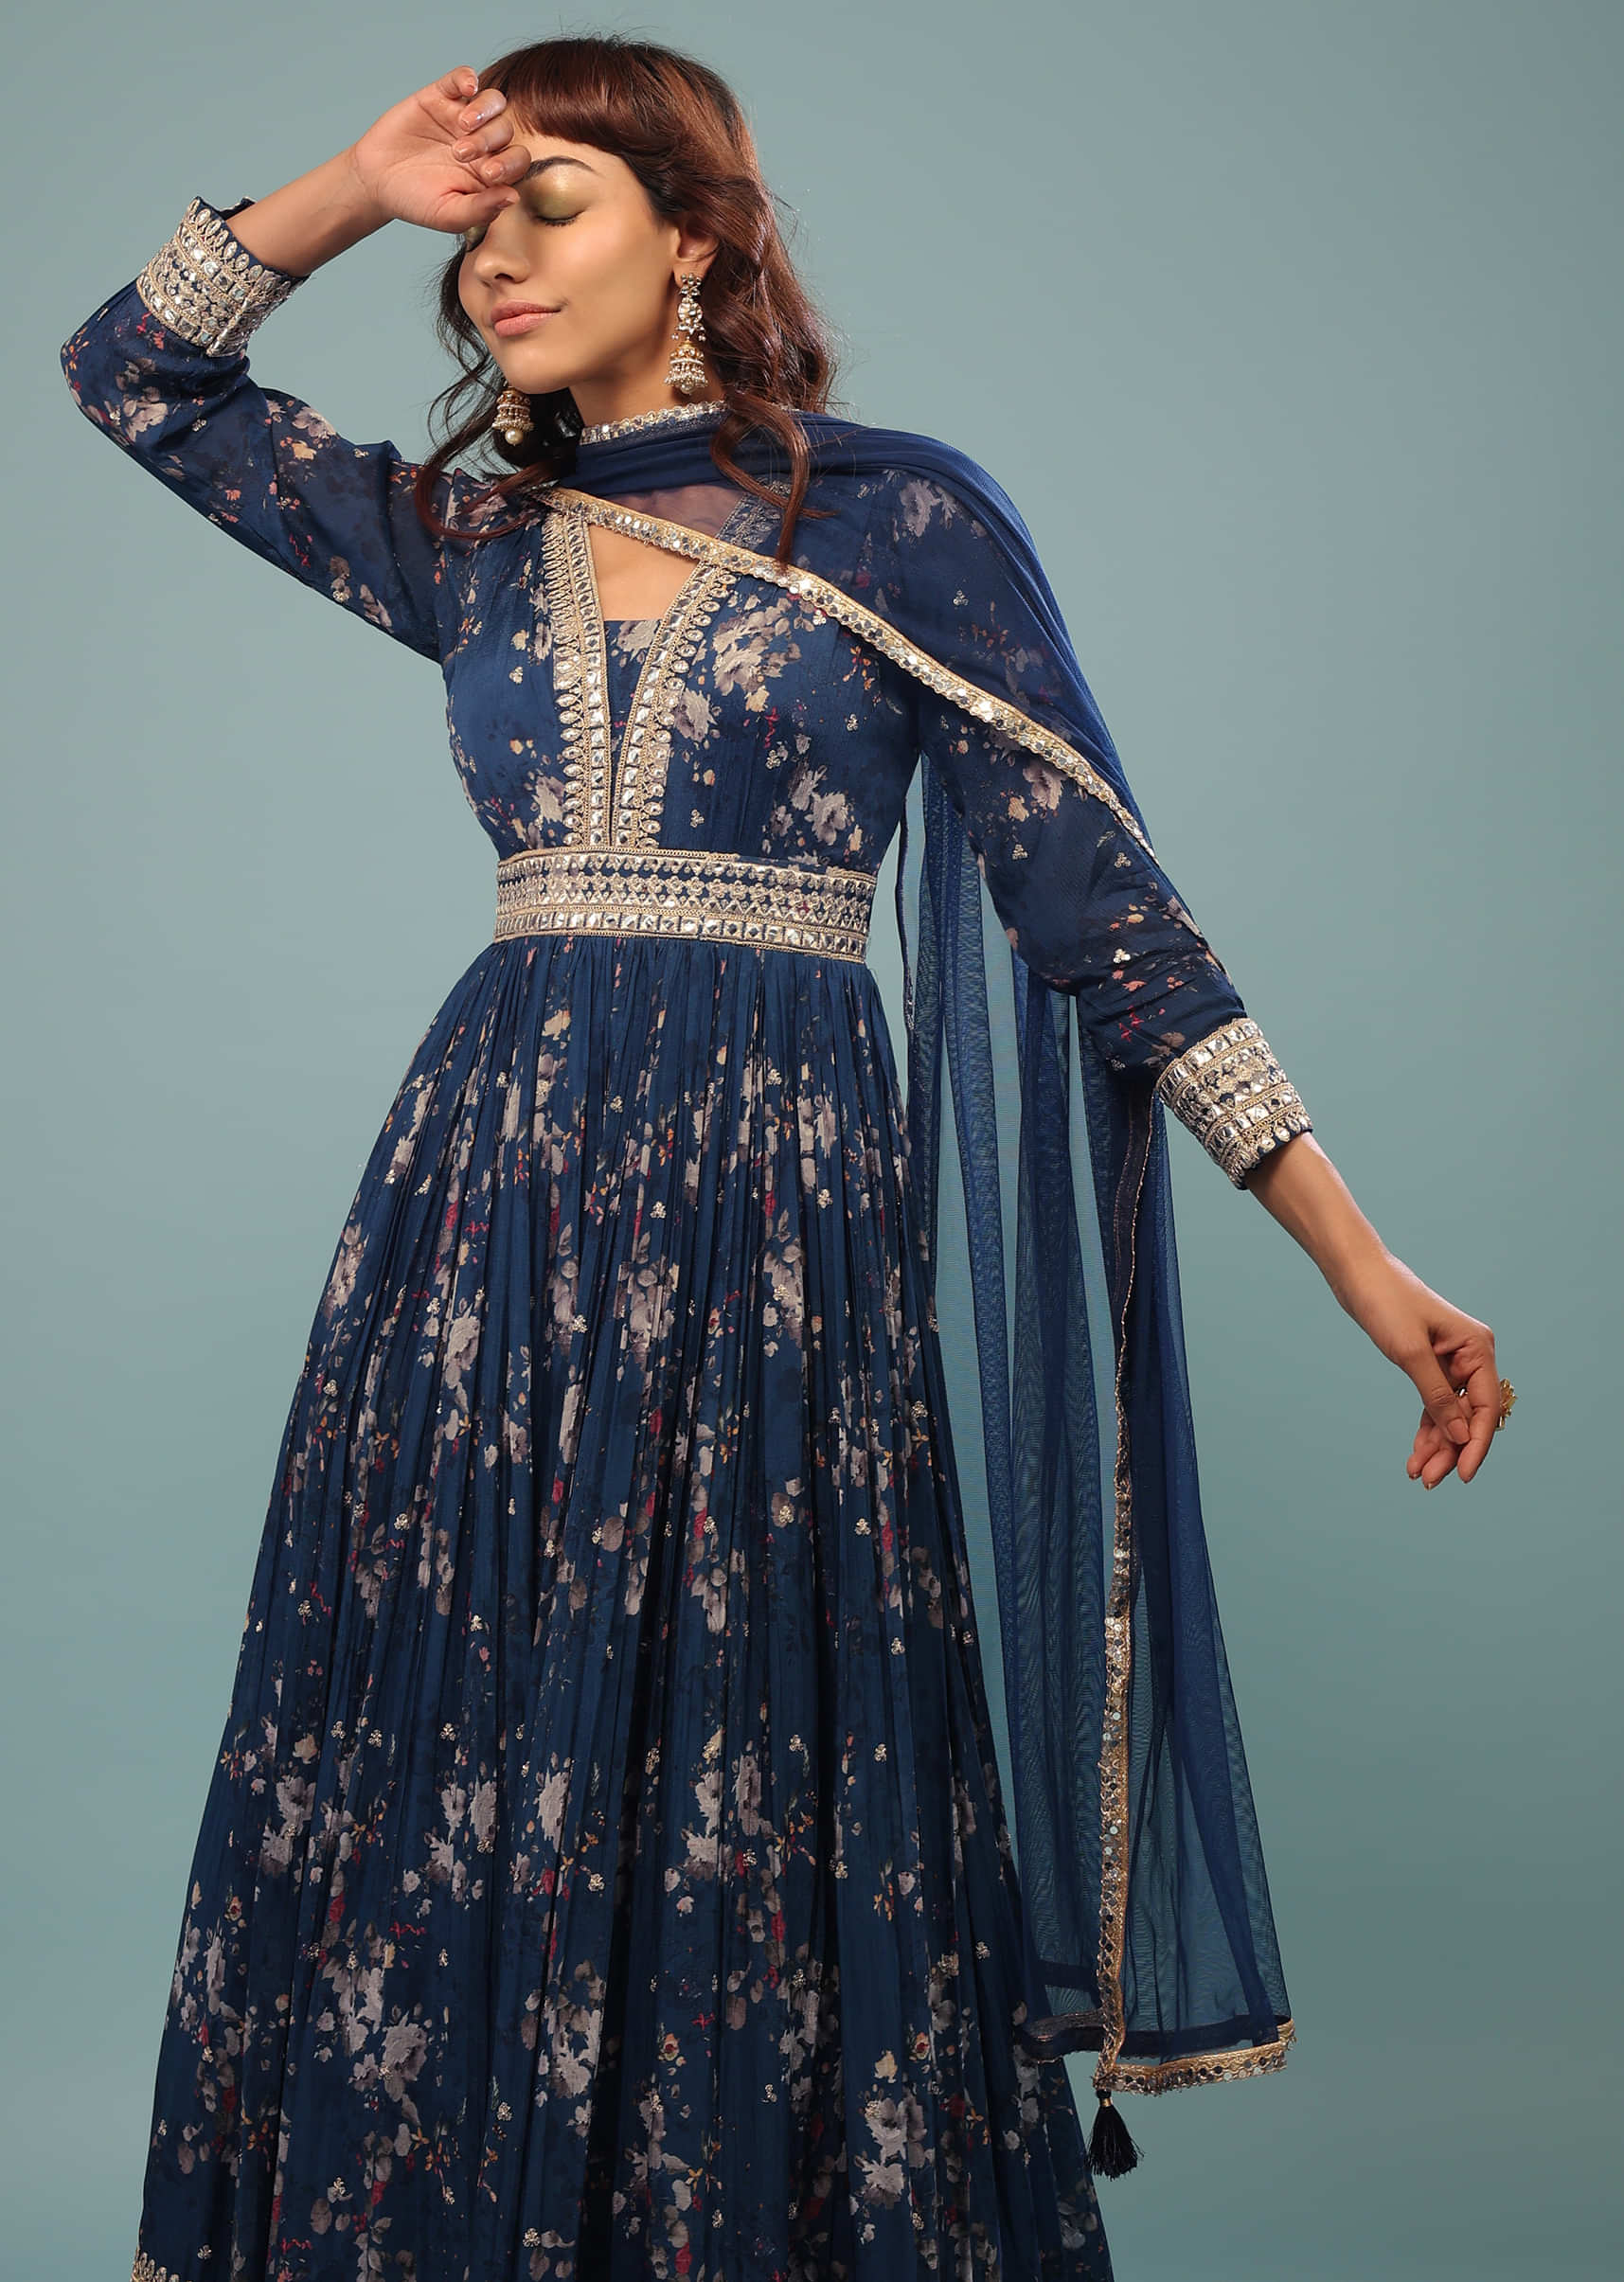 Buy Indigo Blue Georgette Anarkali Suit with Embroidery.